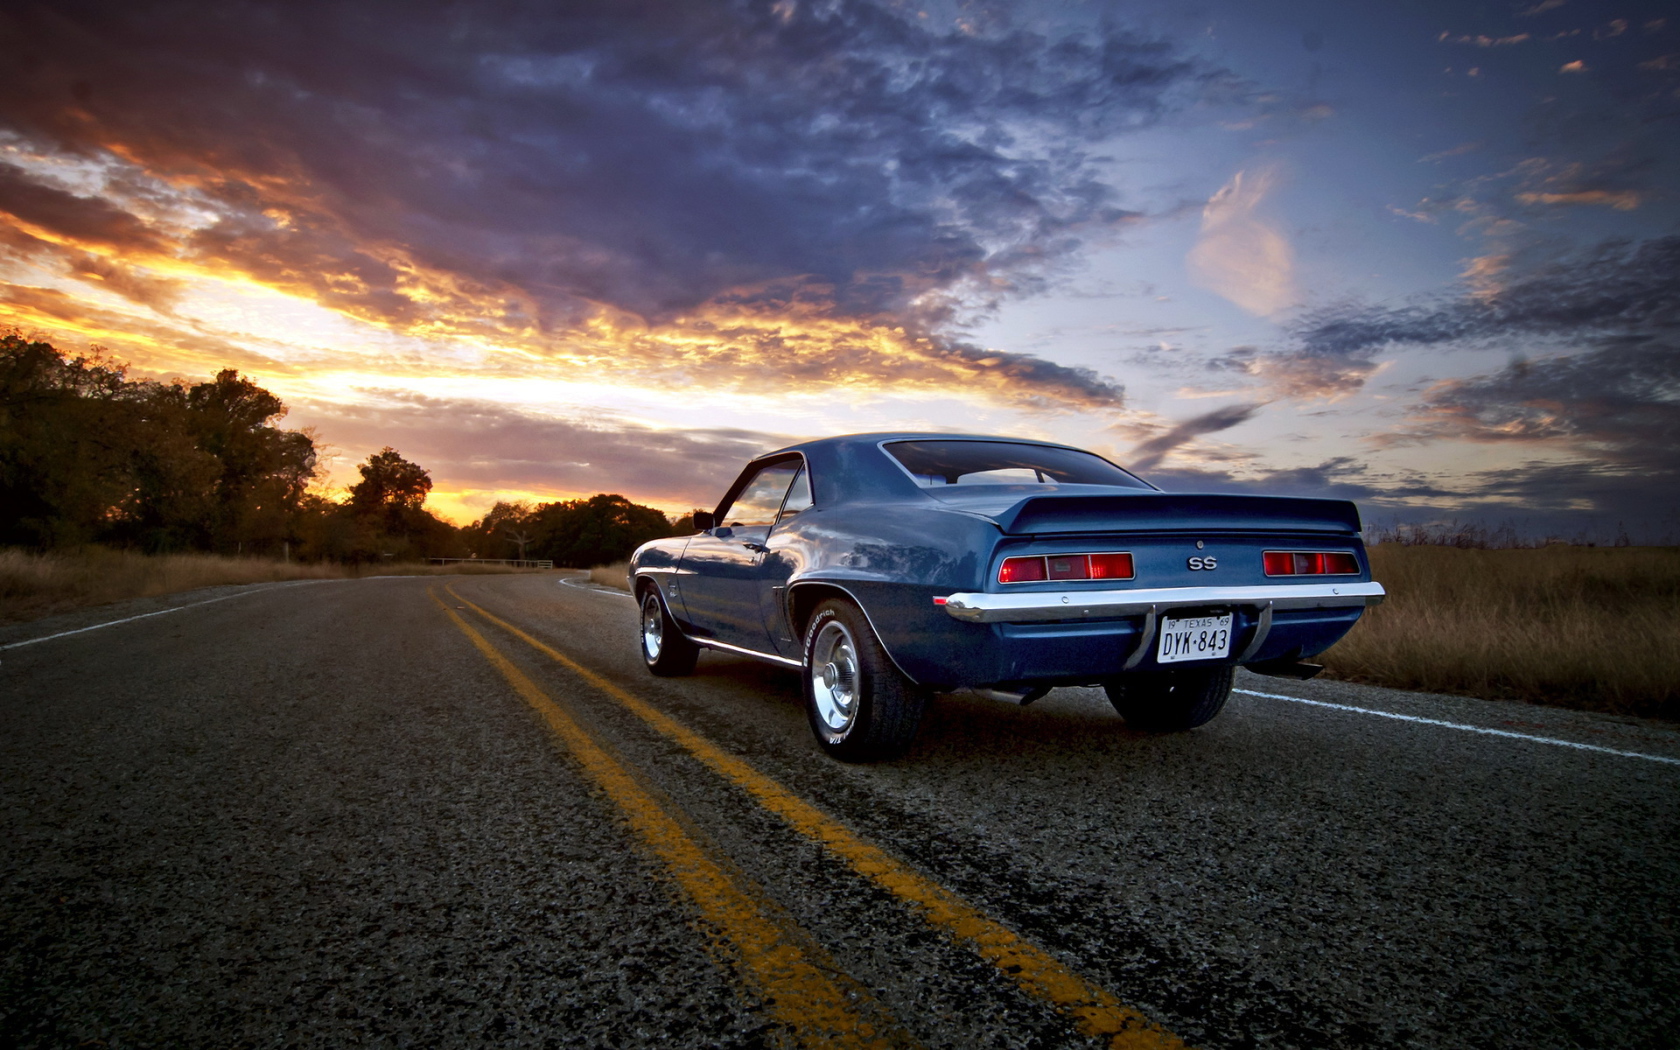 The 69 Camaro rides into the sunset